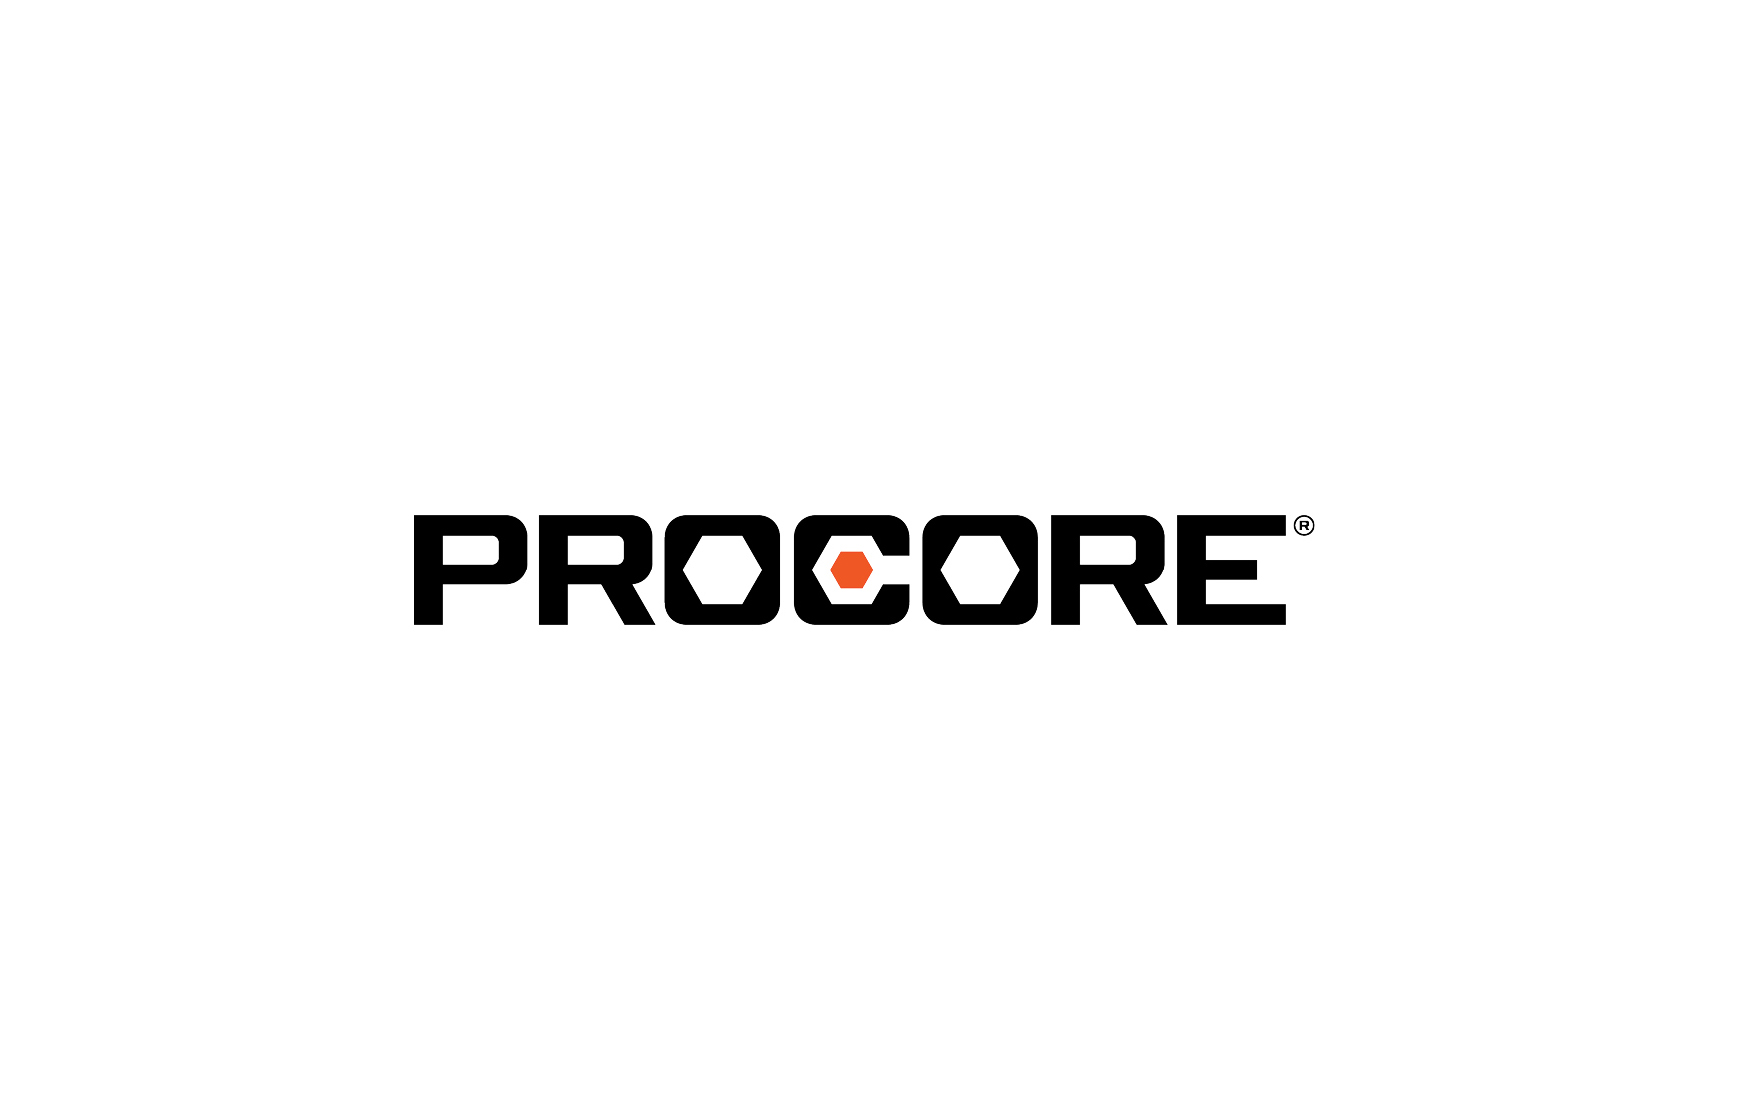 What’s So Great About Procore?